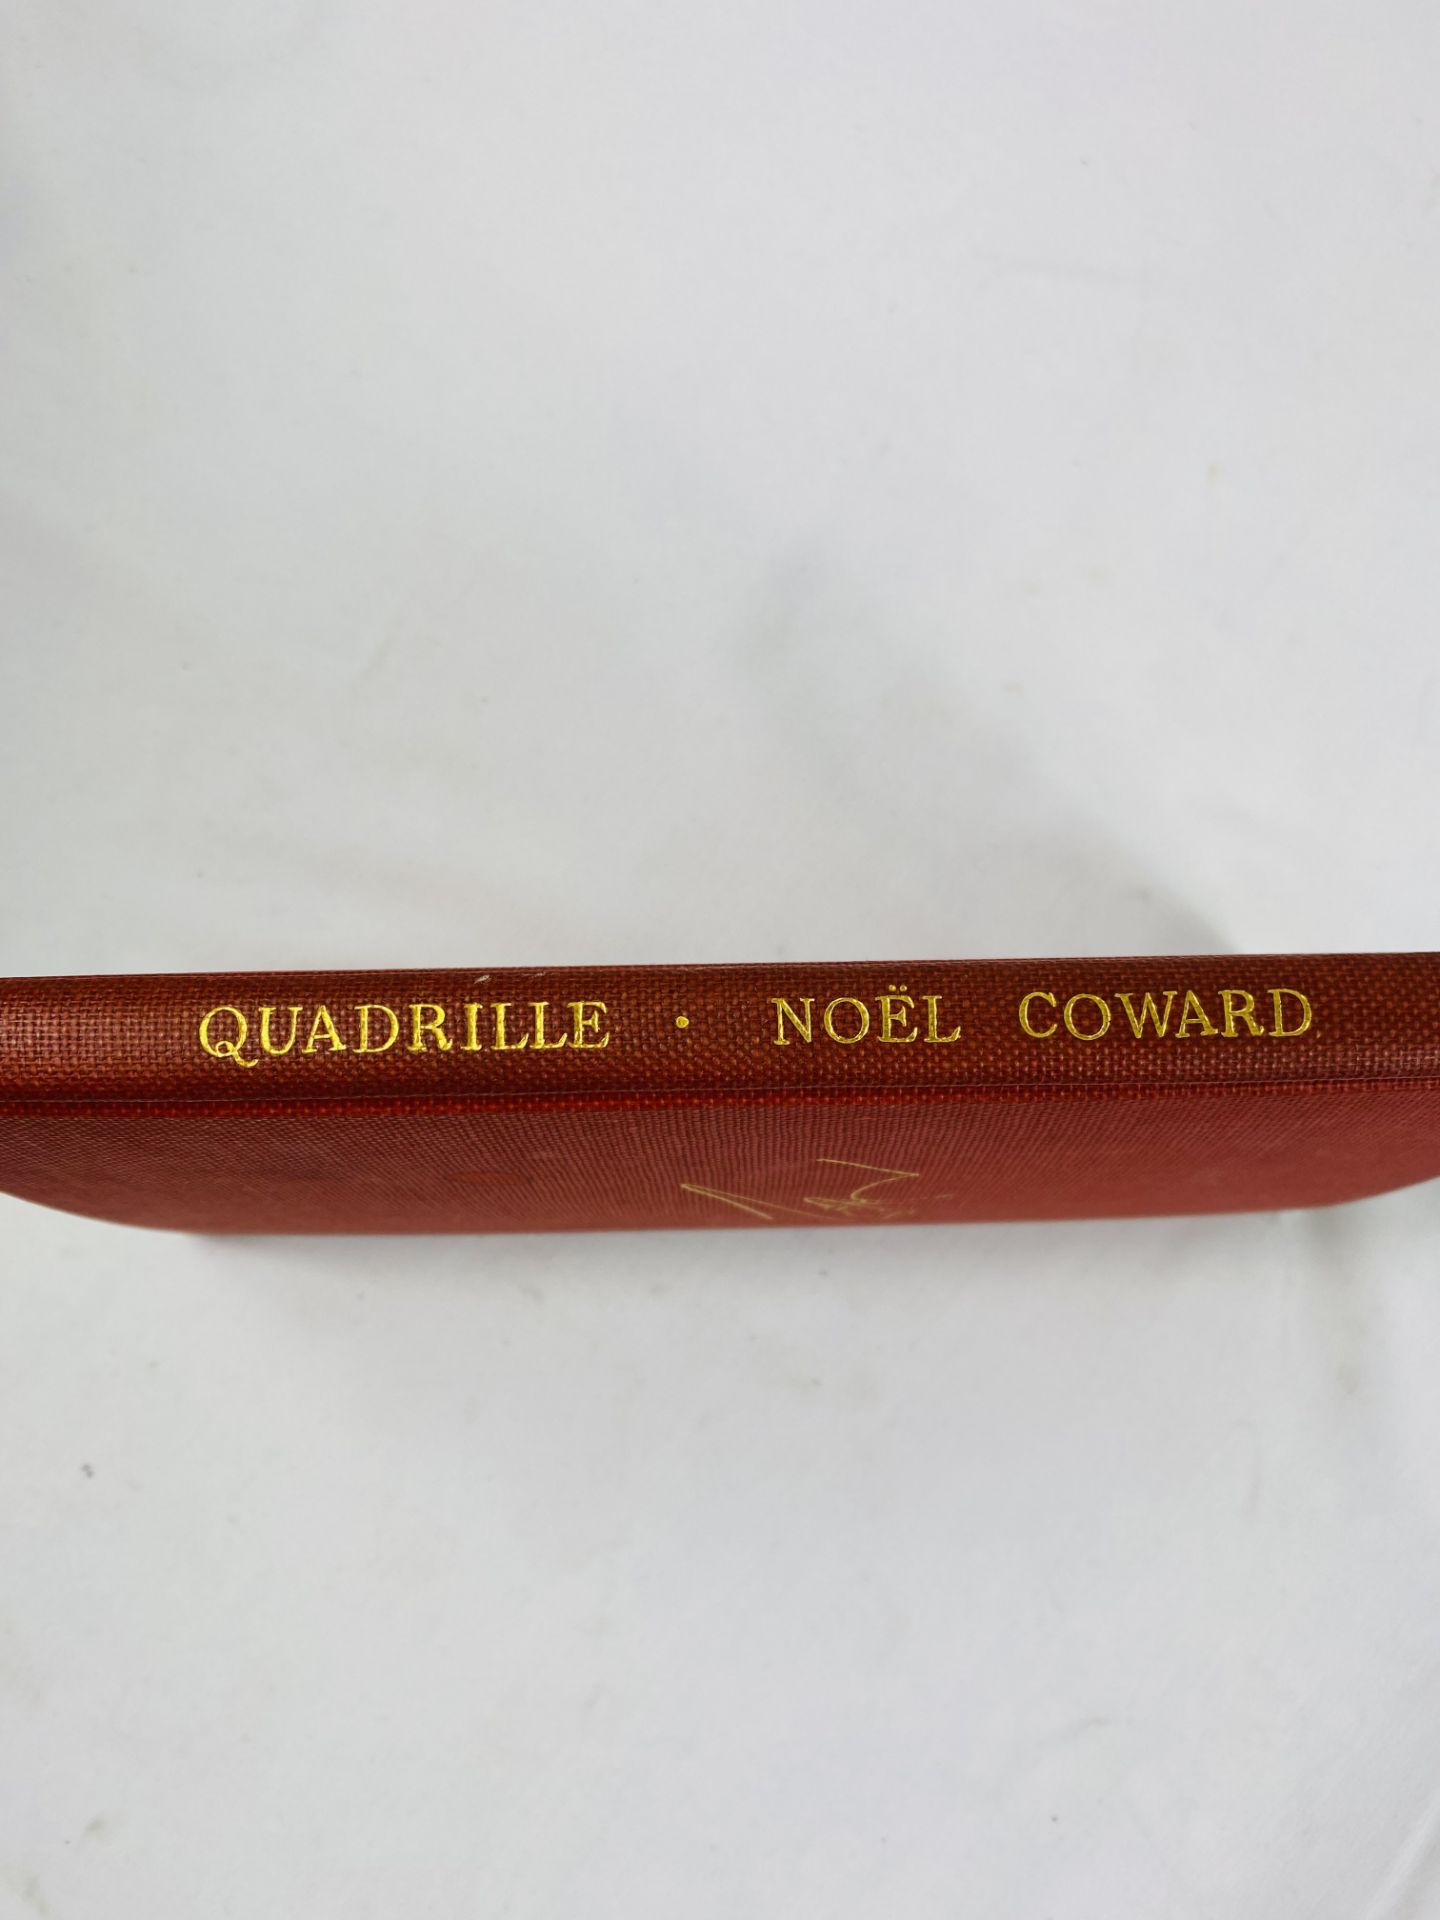 Noel Coward, two copies Not Yet the Dodo and other verses - Image 9 of 10